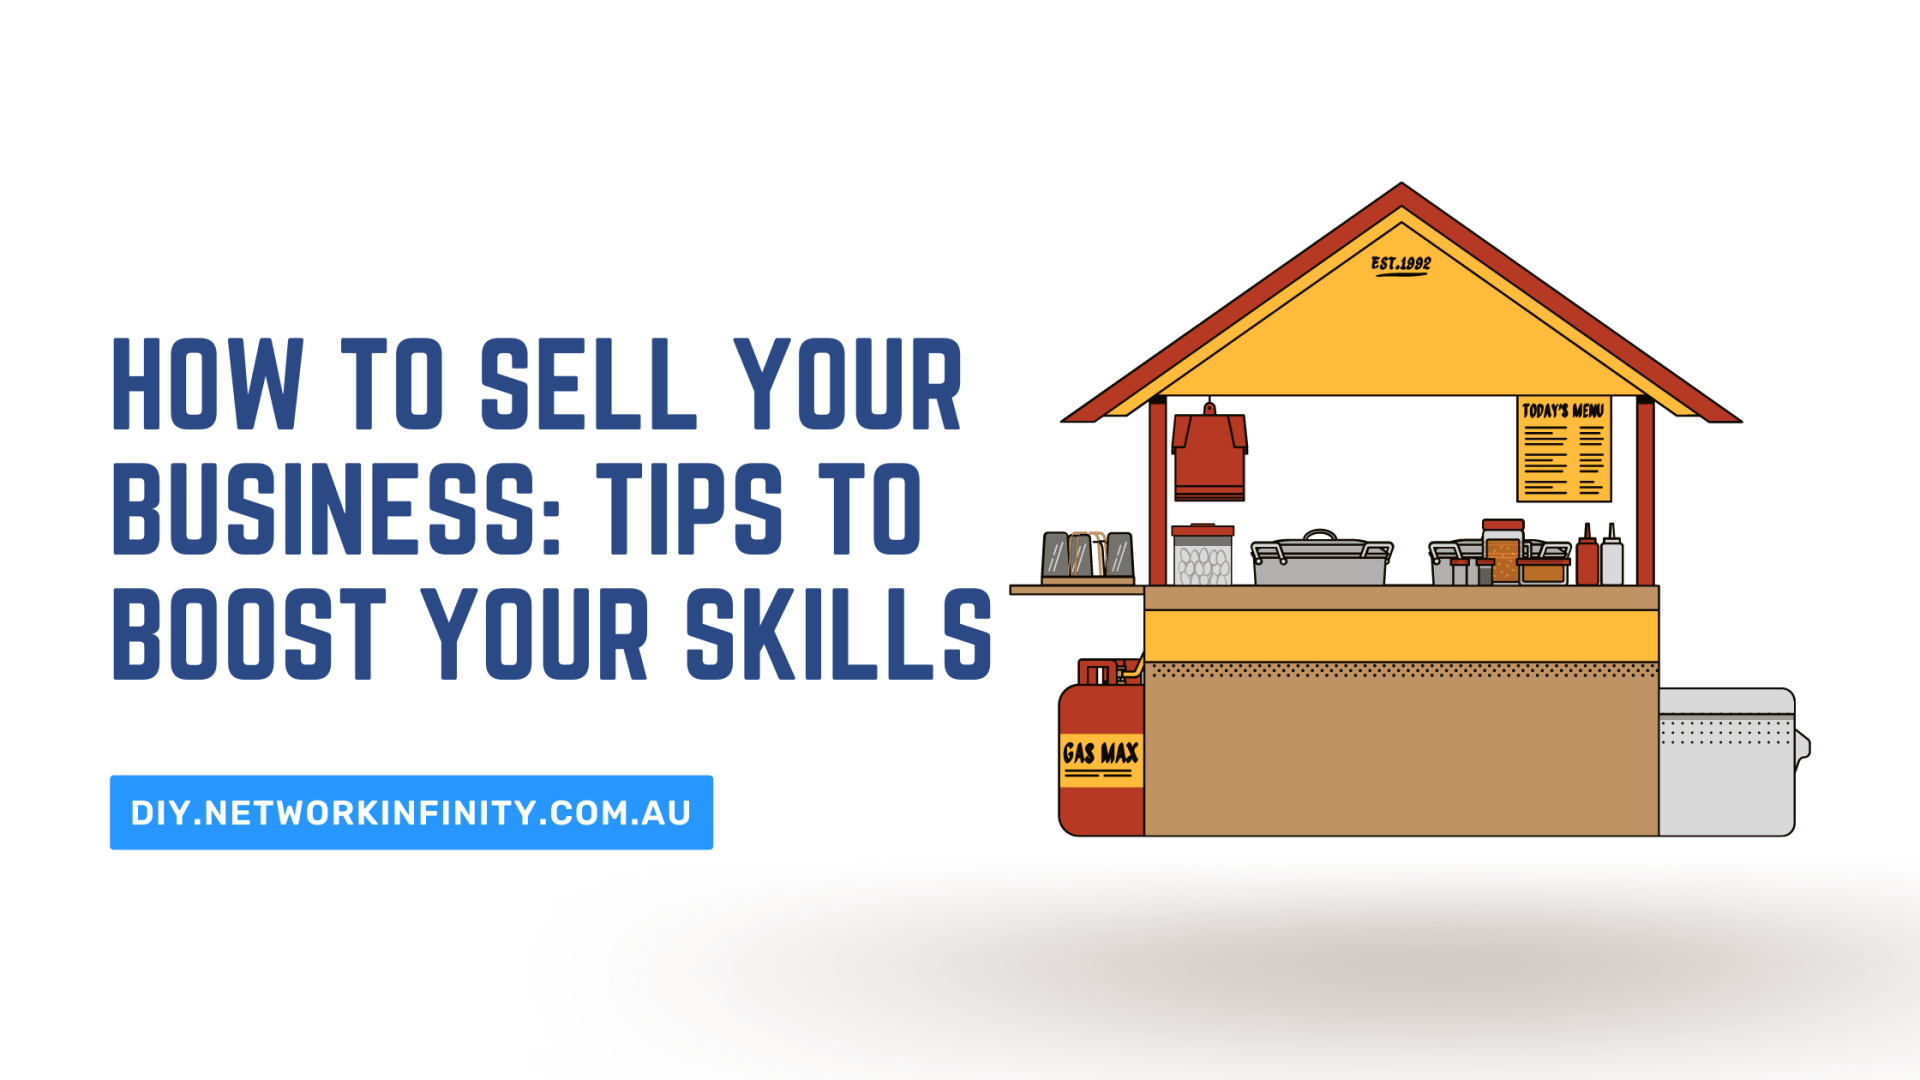 How To Sell Your Business: Tips To Boost Your Prospecting And Closing Skills